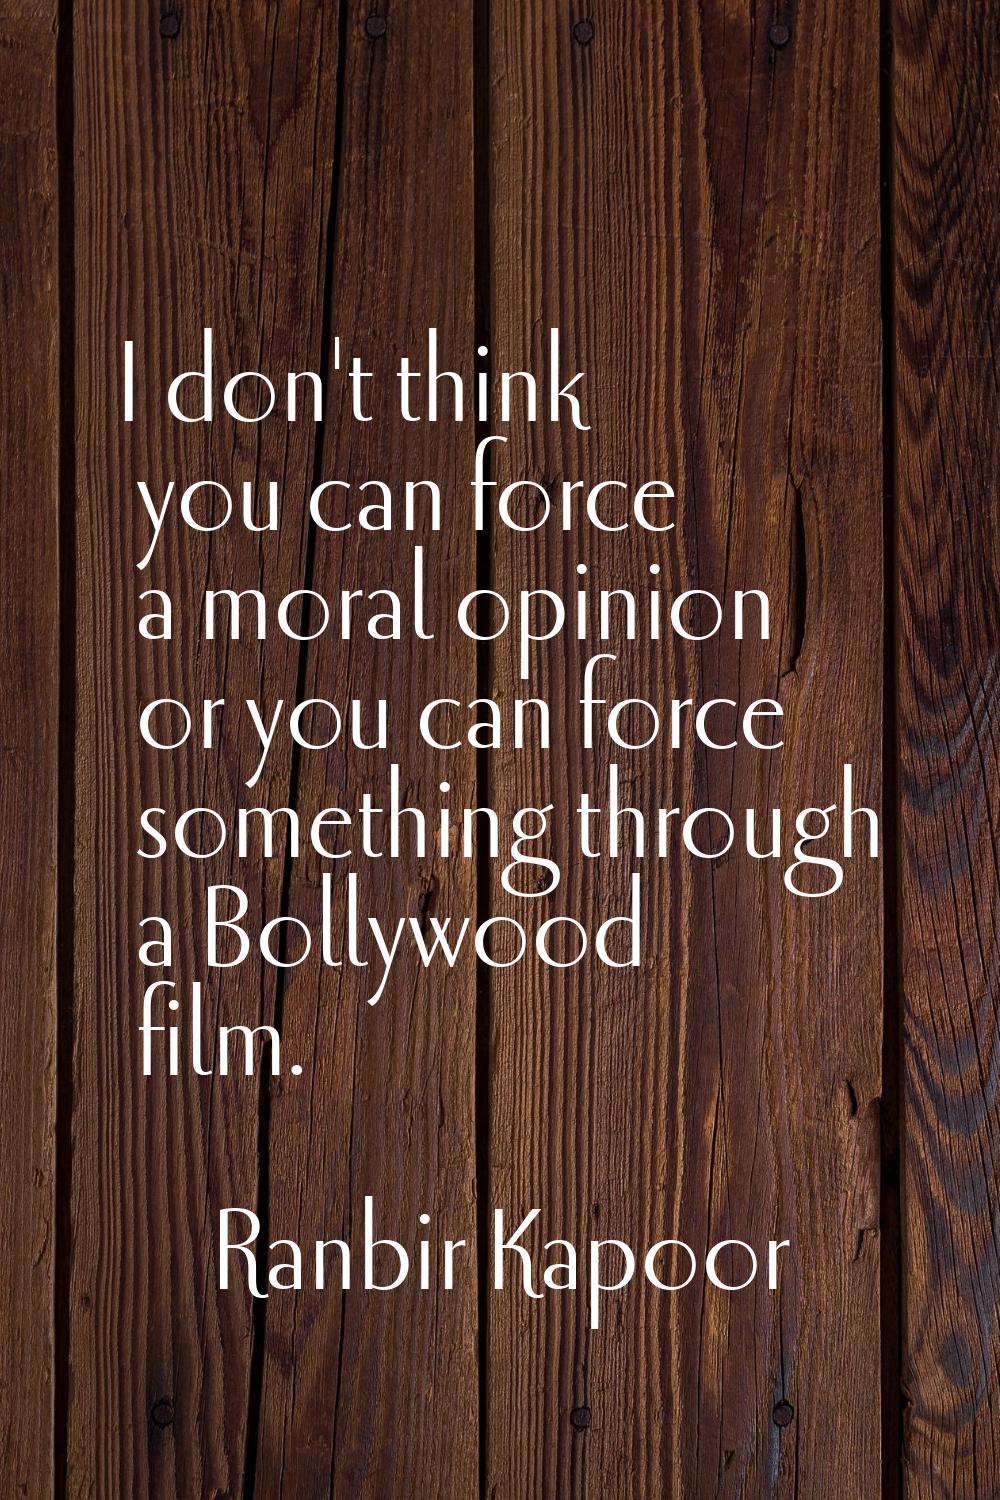 I don't think you can force a moral opinion or you can force something through a Bollywood film.